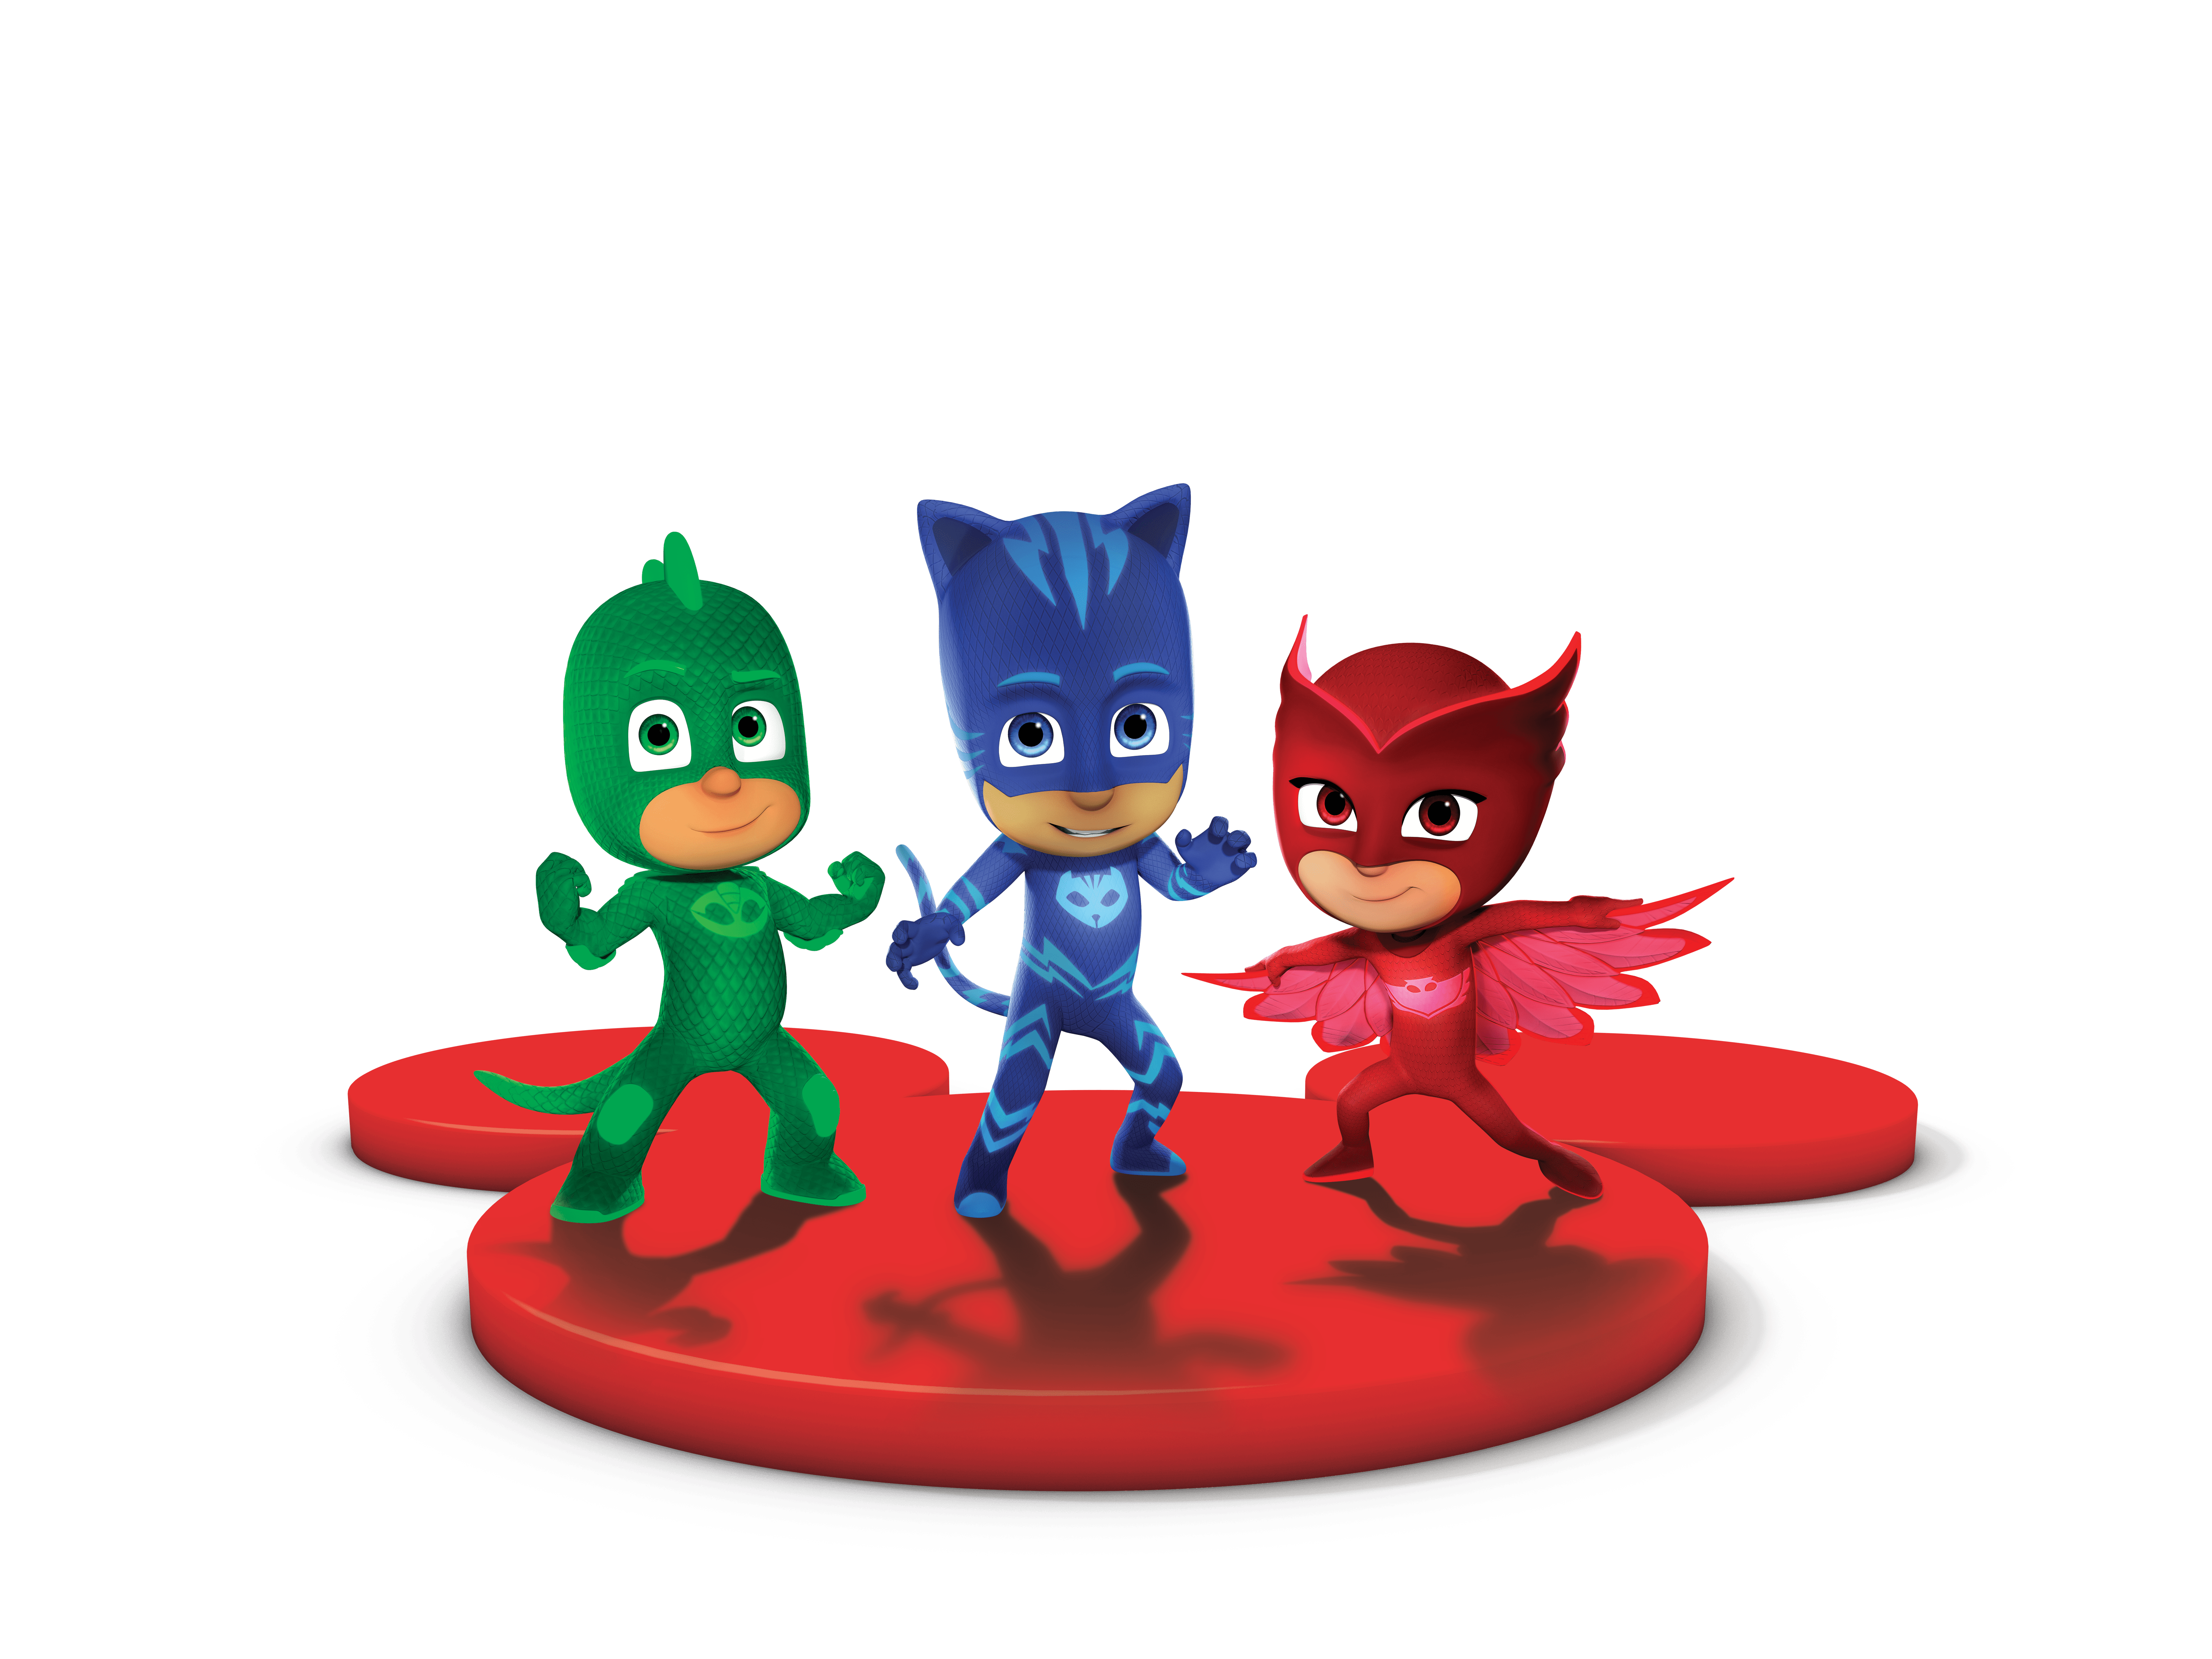 best image about pj mask. Image search